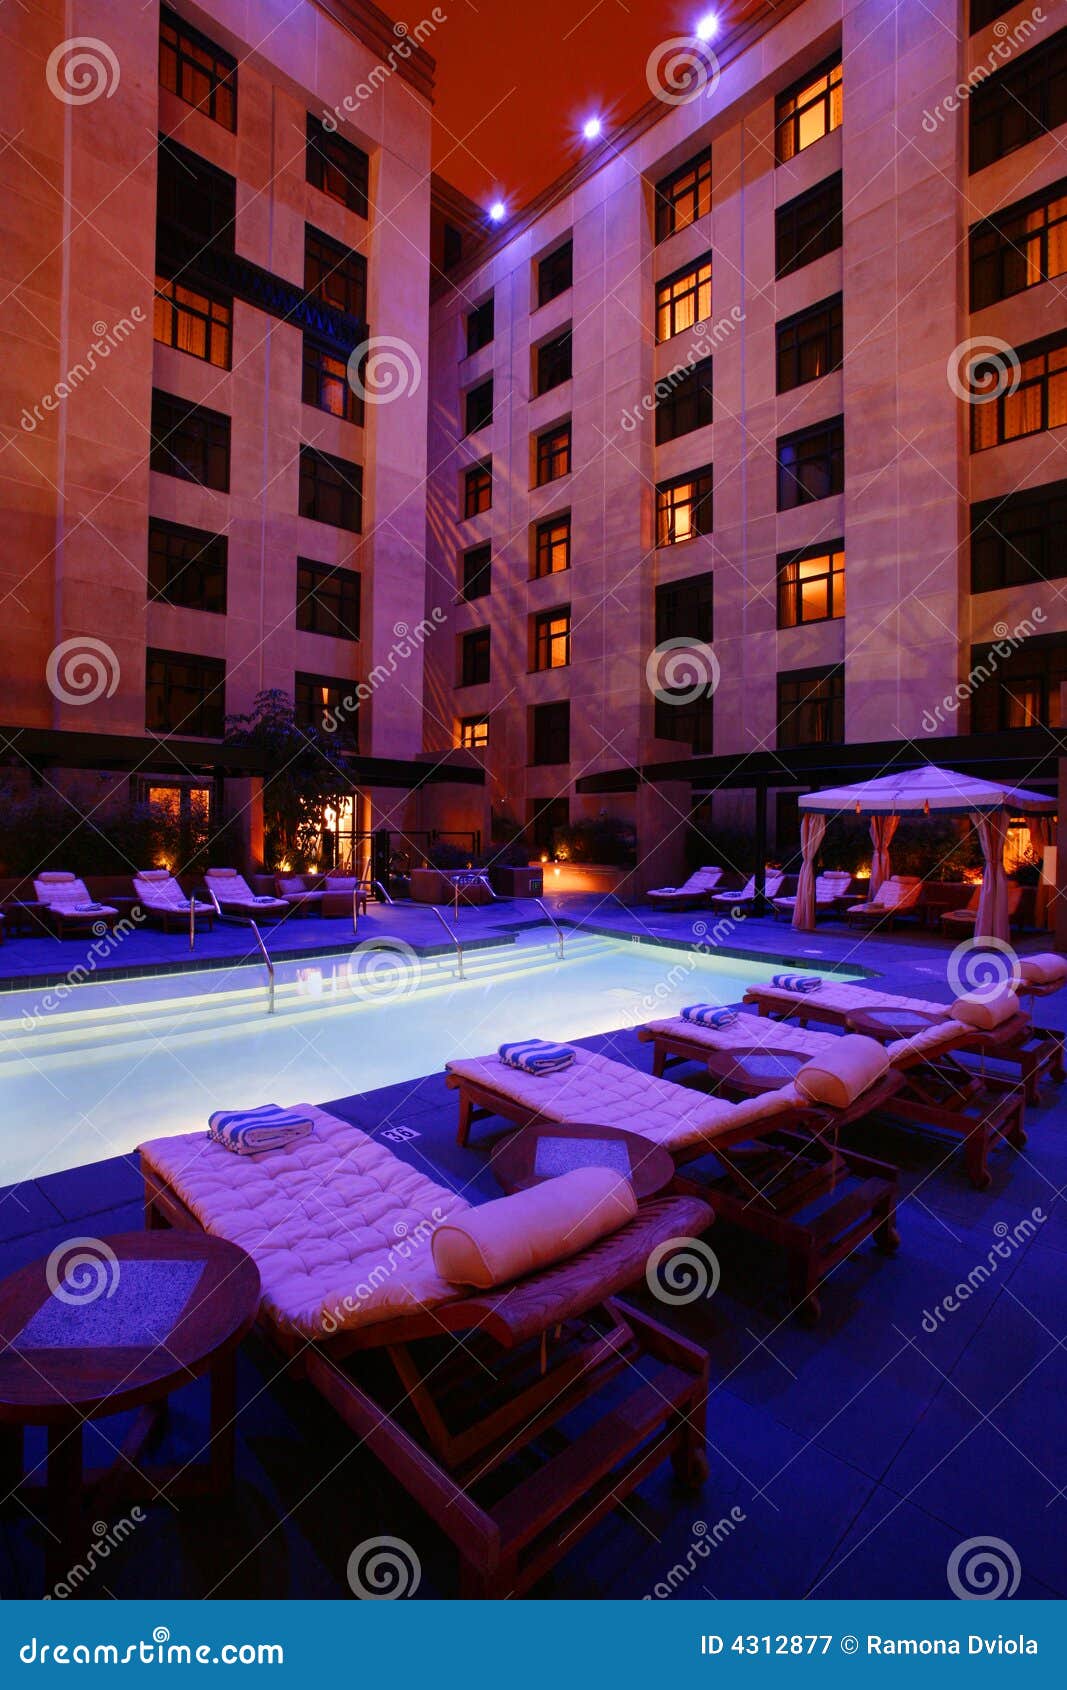 Poolside With Lounge Chairs Stock Image - Image of riding, exterior